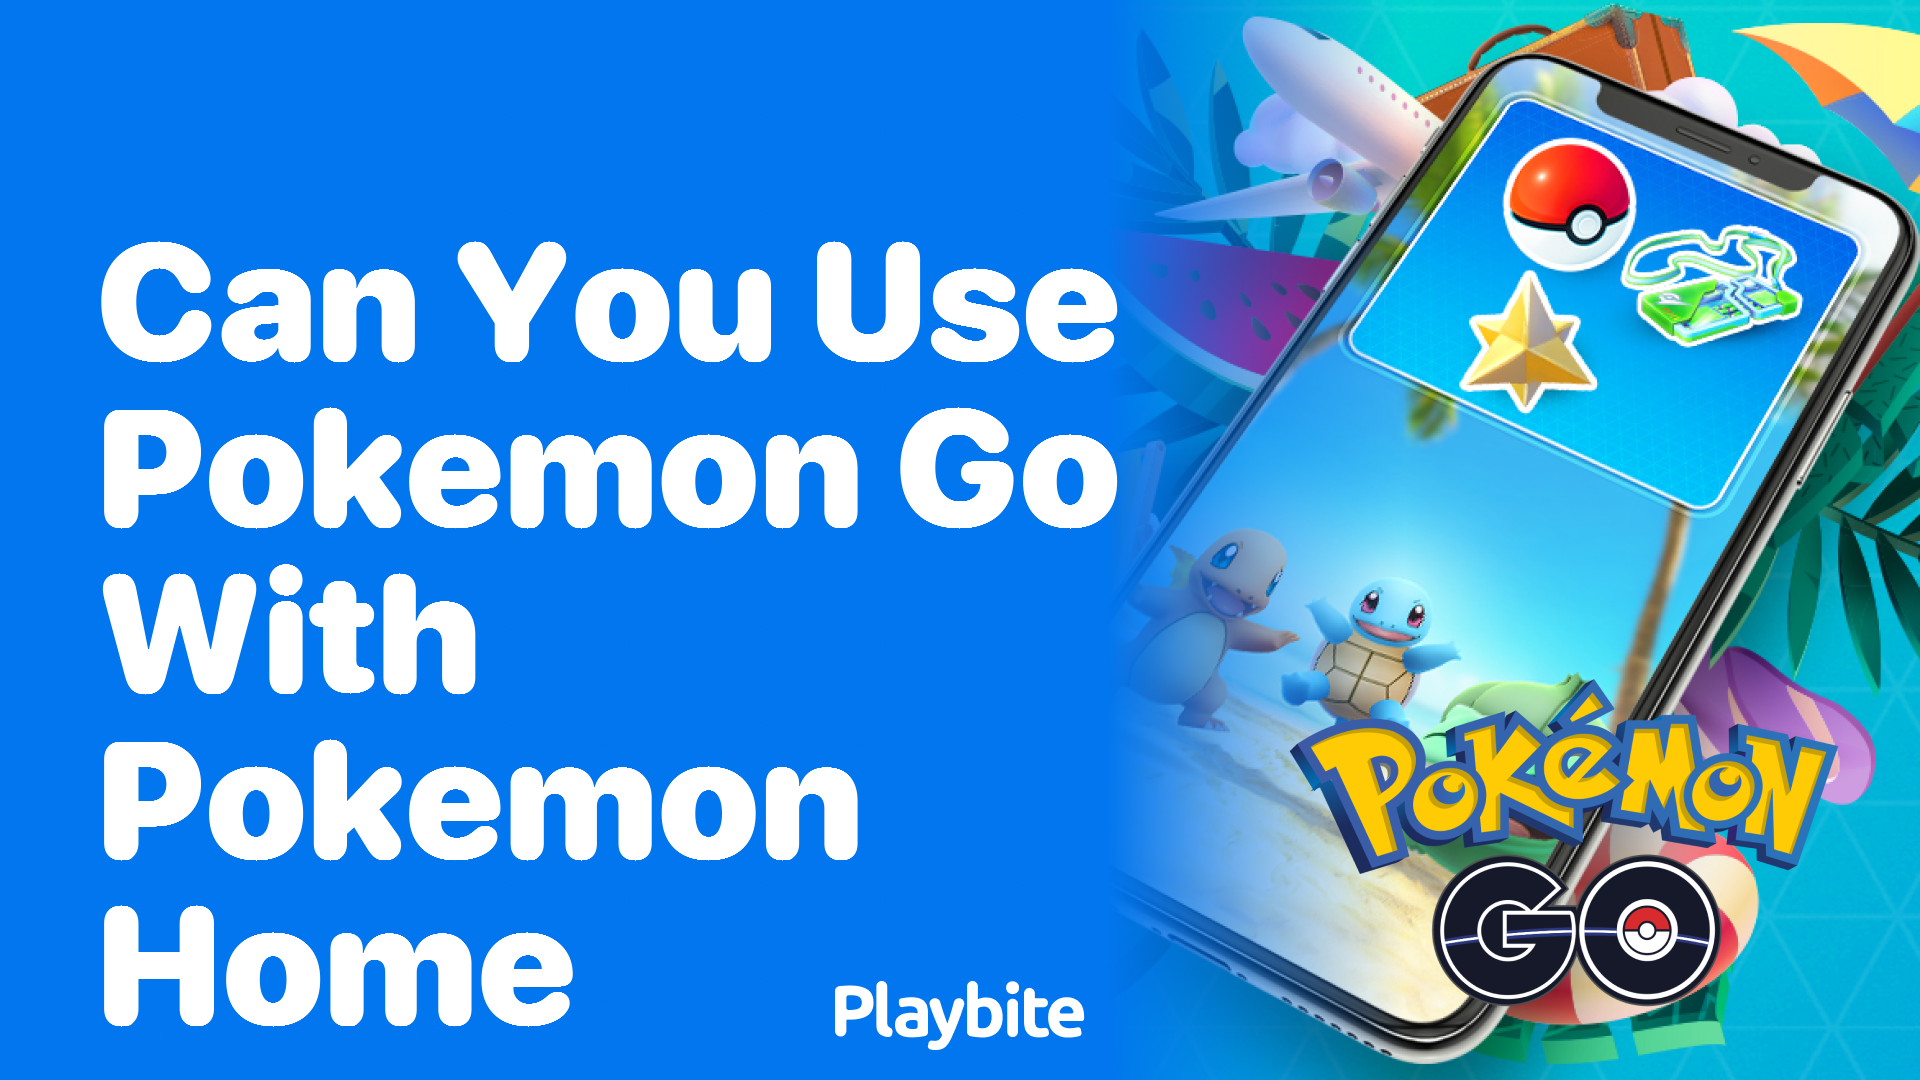 Can You Use Pokemon GO with Pokemon Home?